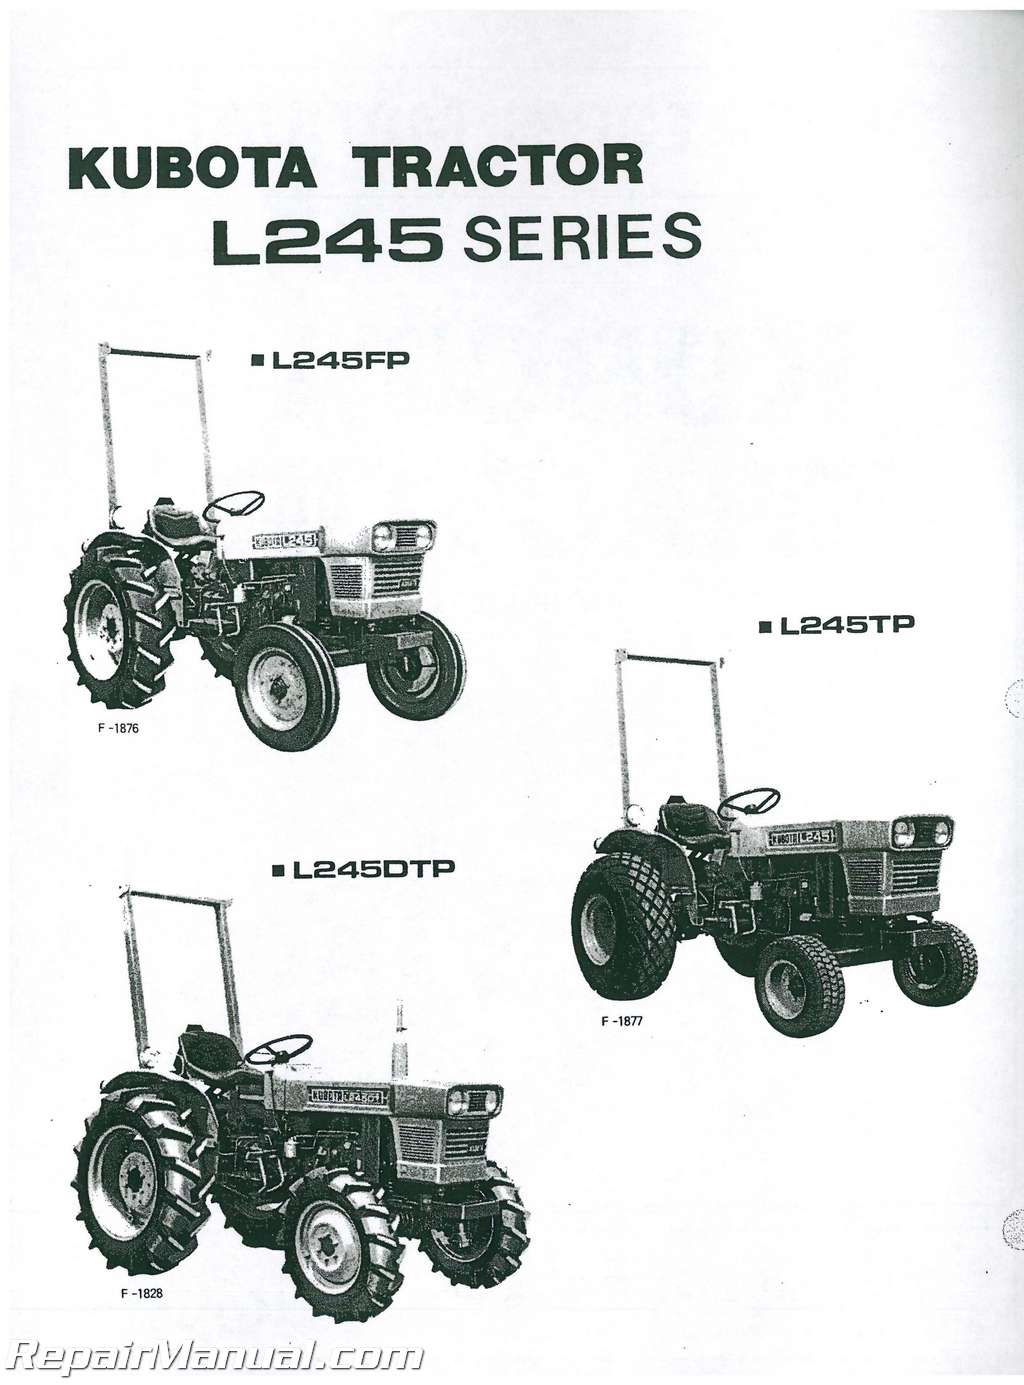 KUBOTA L295 L295DT TRACTOR OPERATORS OWNERS MANUAL MAINTENANCE SPECIFICATIONS 